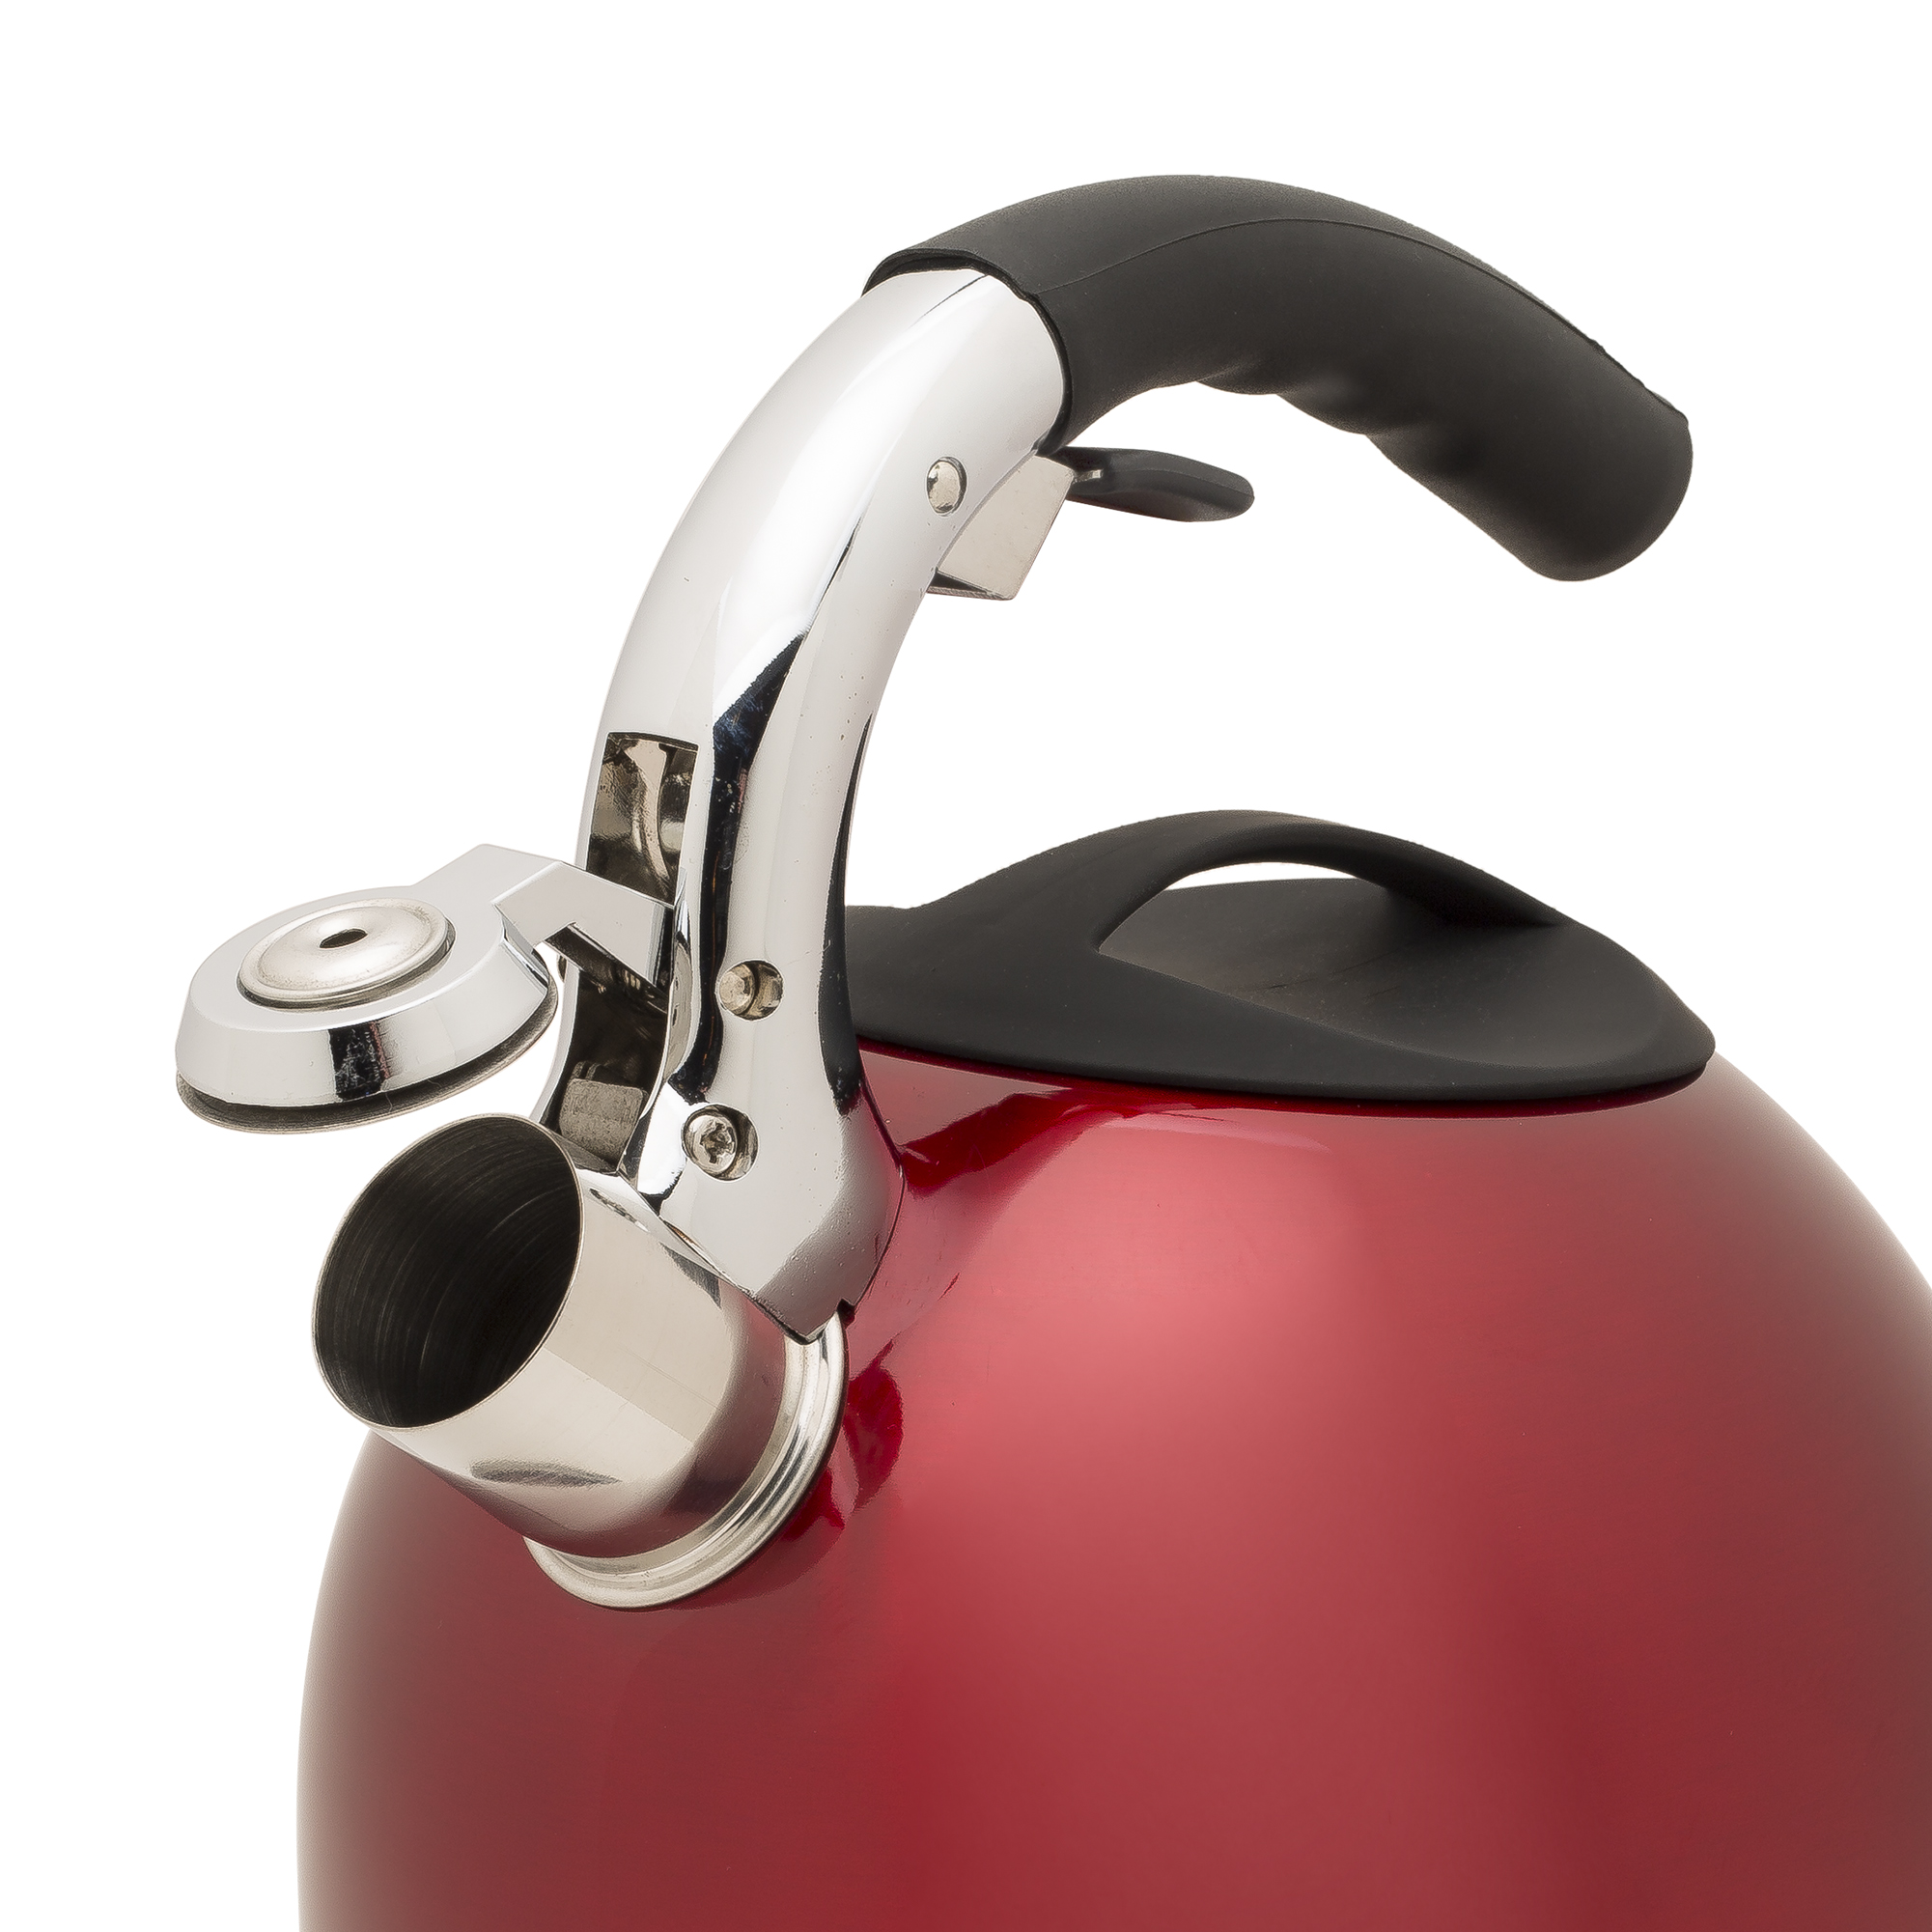 Primula Soft Grip 3 Qt. Stainless Steel Whistling Kettle - Red - image 5 of 8